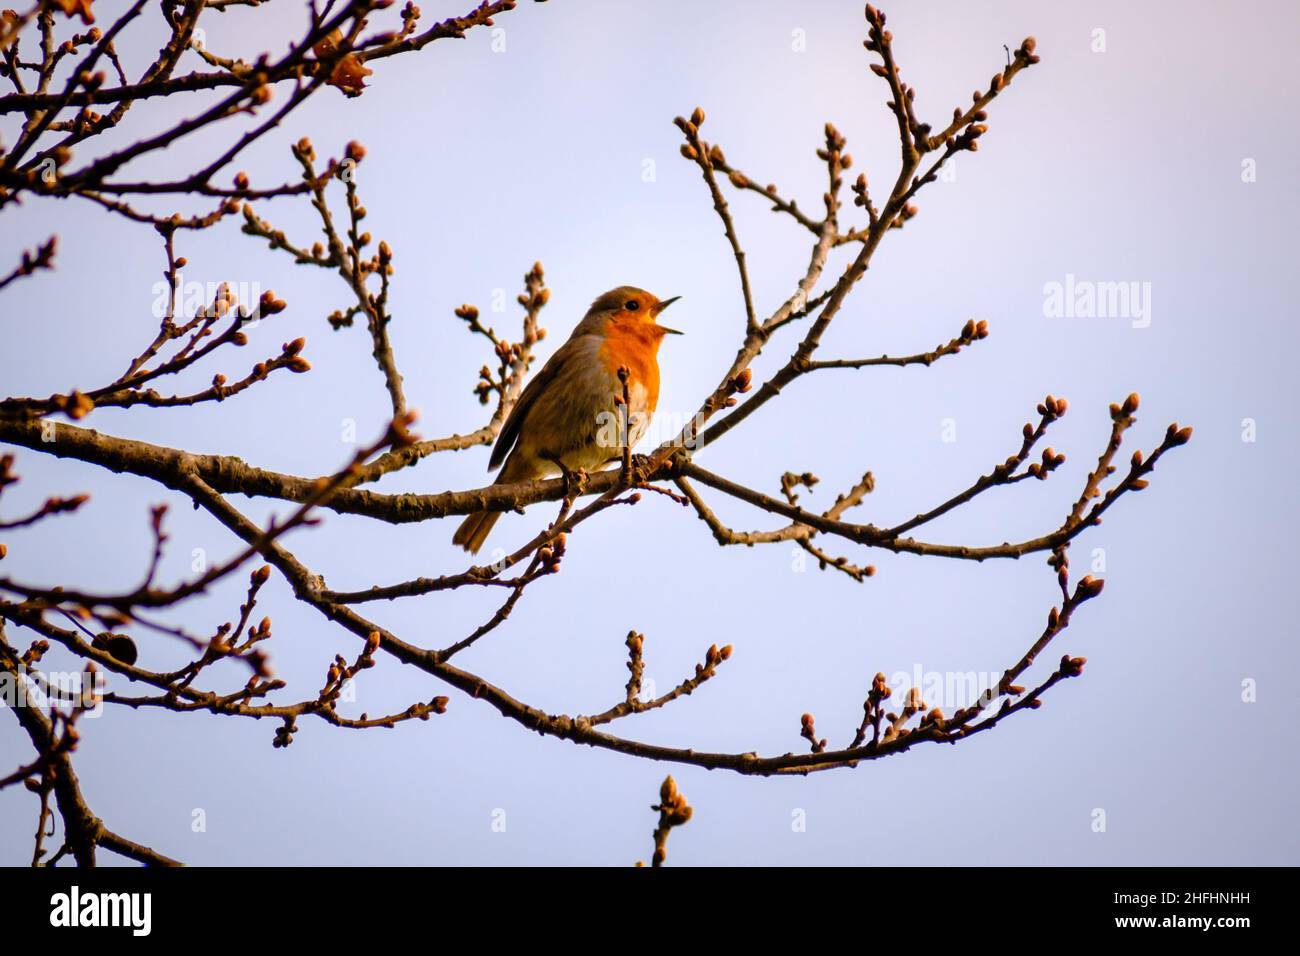 A Robin Sings in a Tree at Sunset Stock Photo